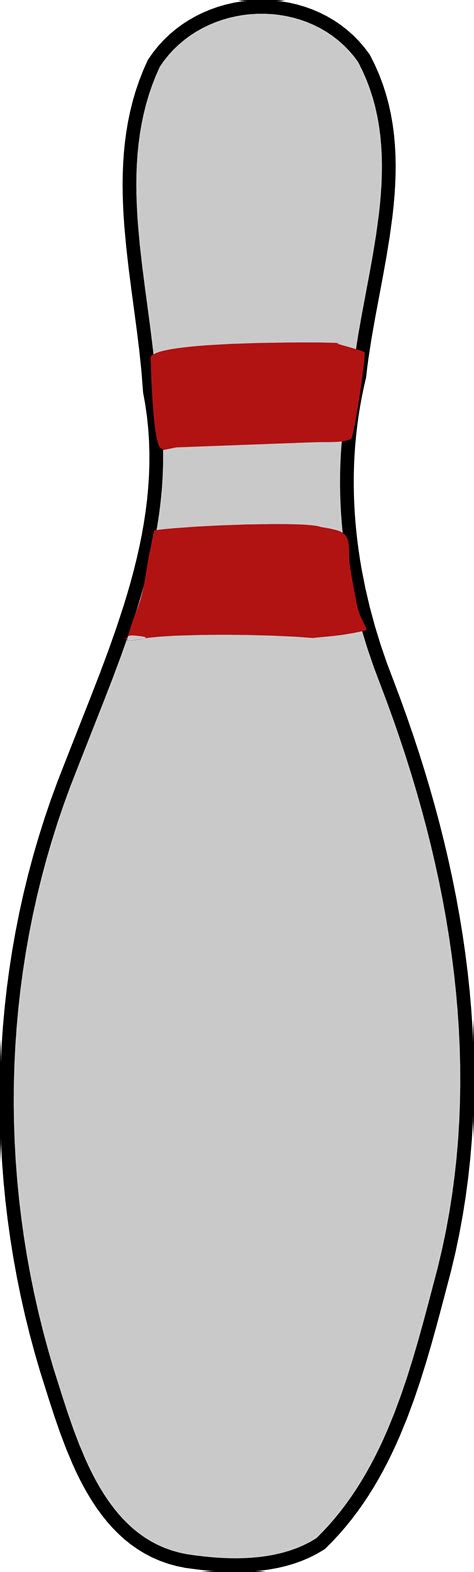 Bowling Pin Drawing Easy Clip Art Library